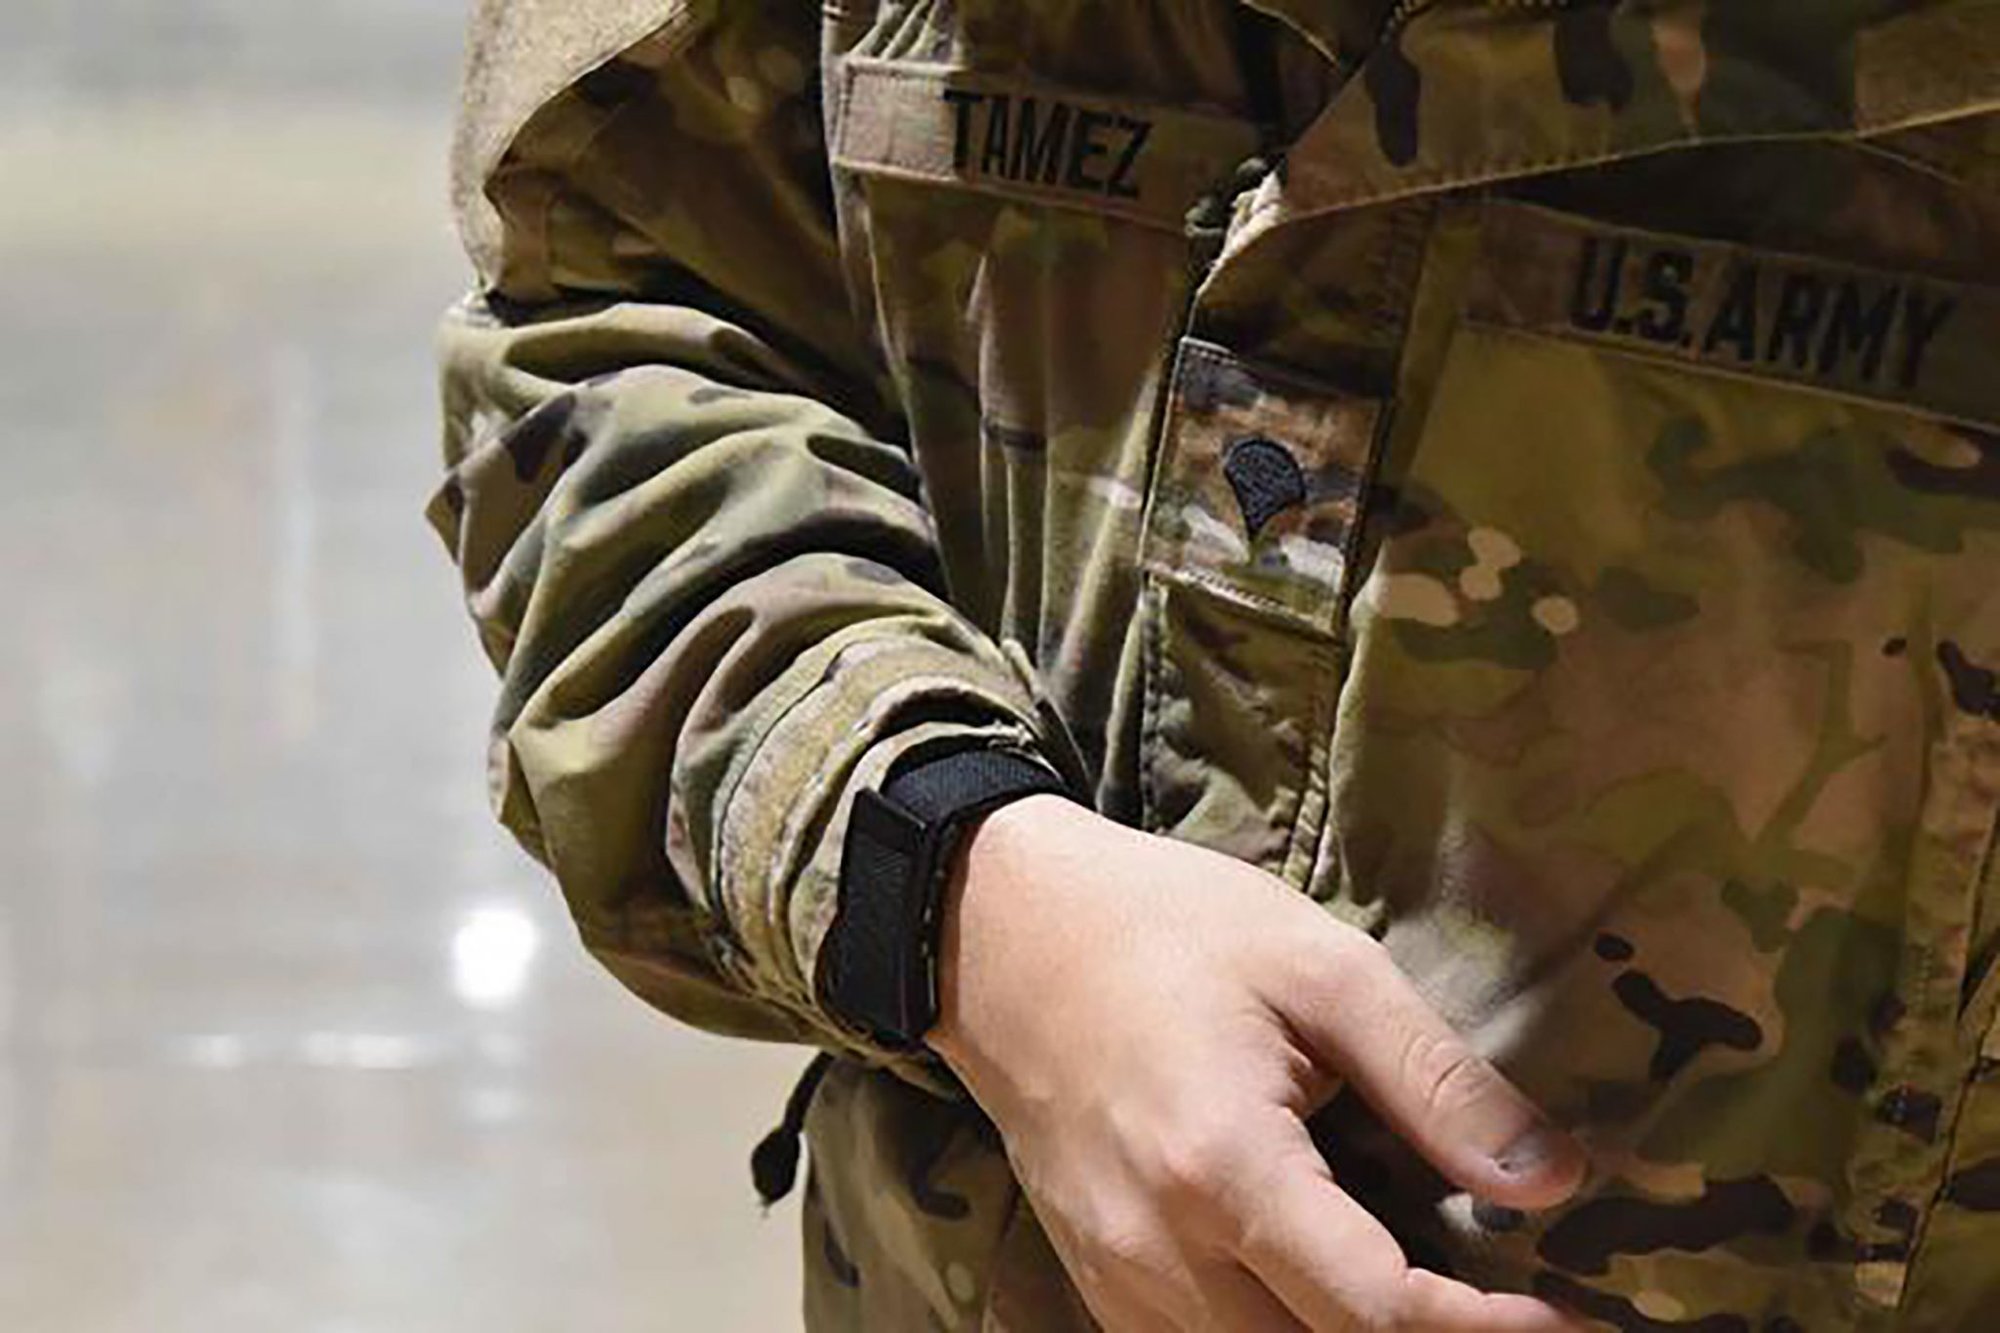 U.S. Army soldier wearing a WHOOP device. The company has partnered with the U.S. Army to test the resiliency of soldiers operating in Arctic environments. (Photo courtesy of WHOOP)